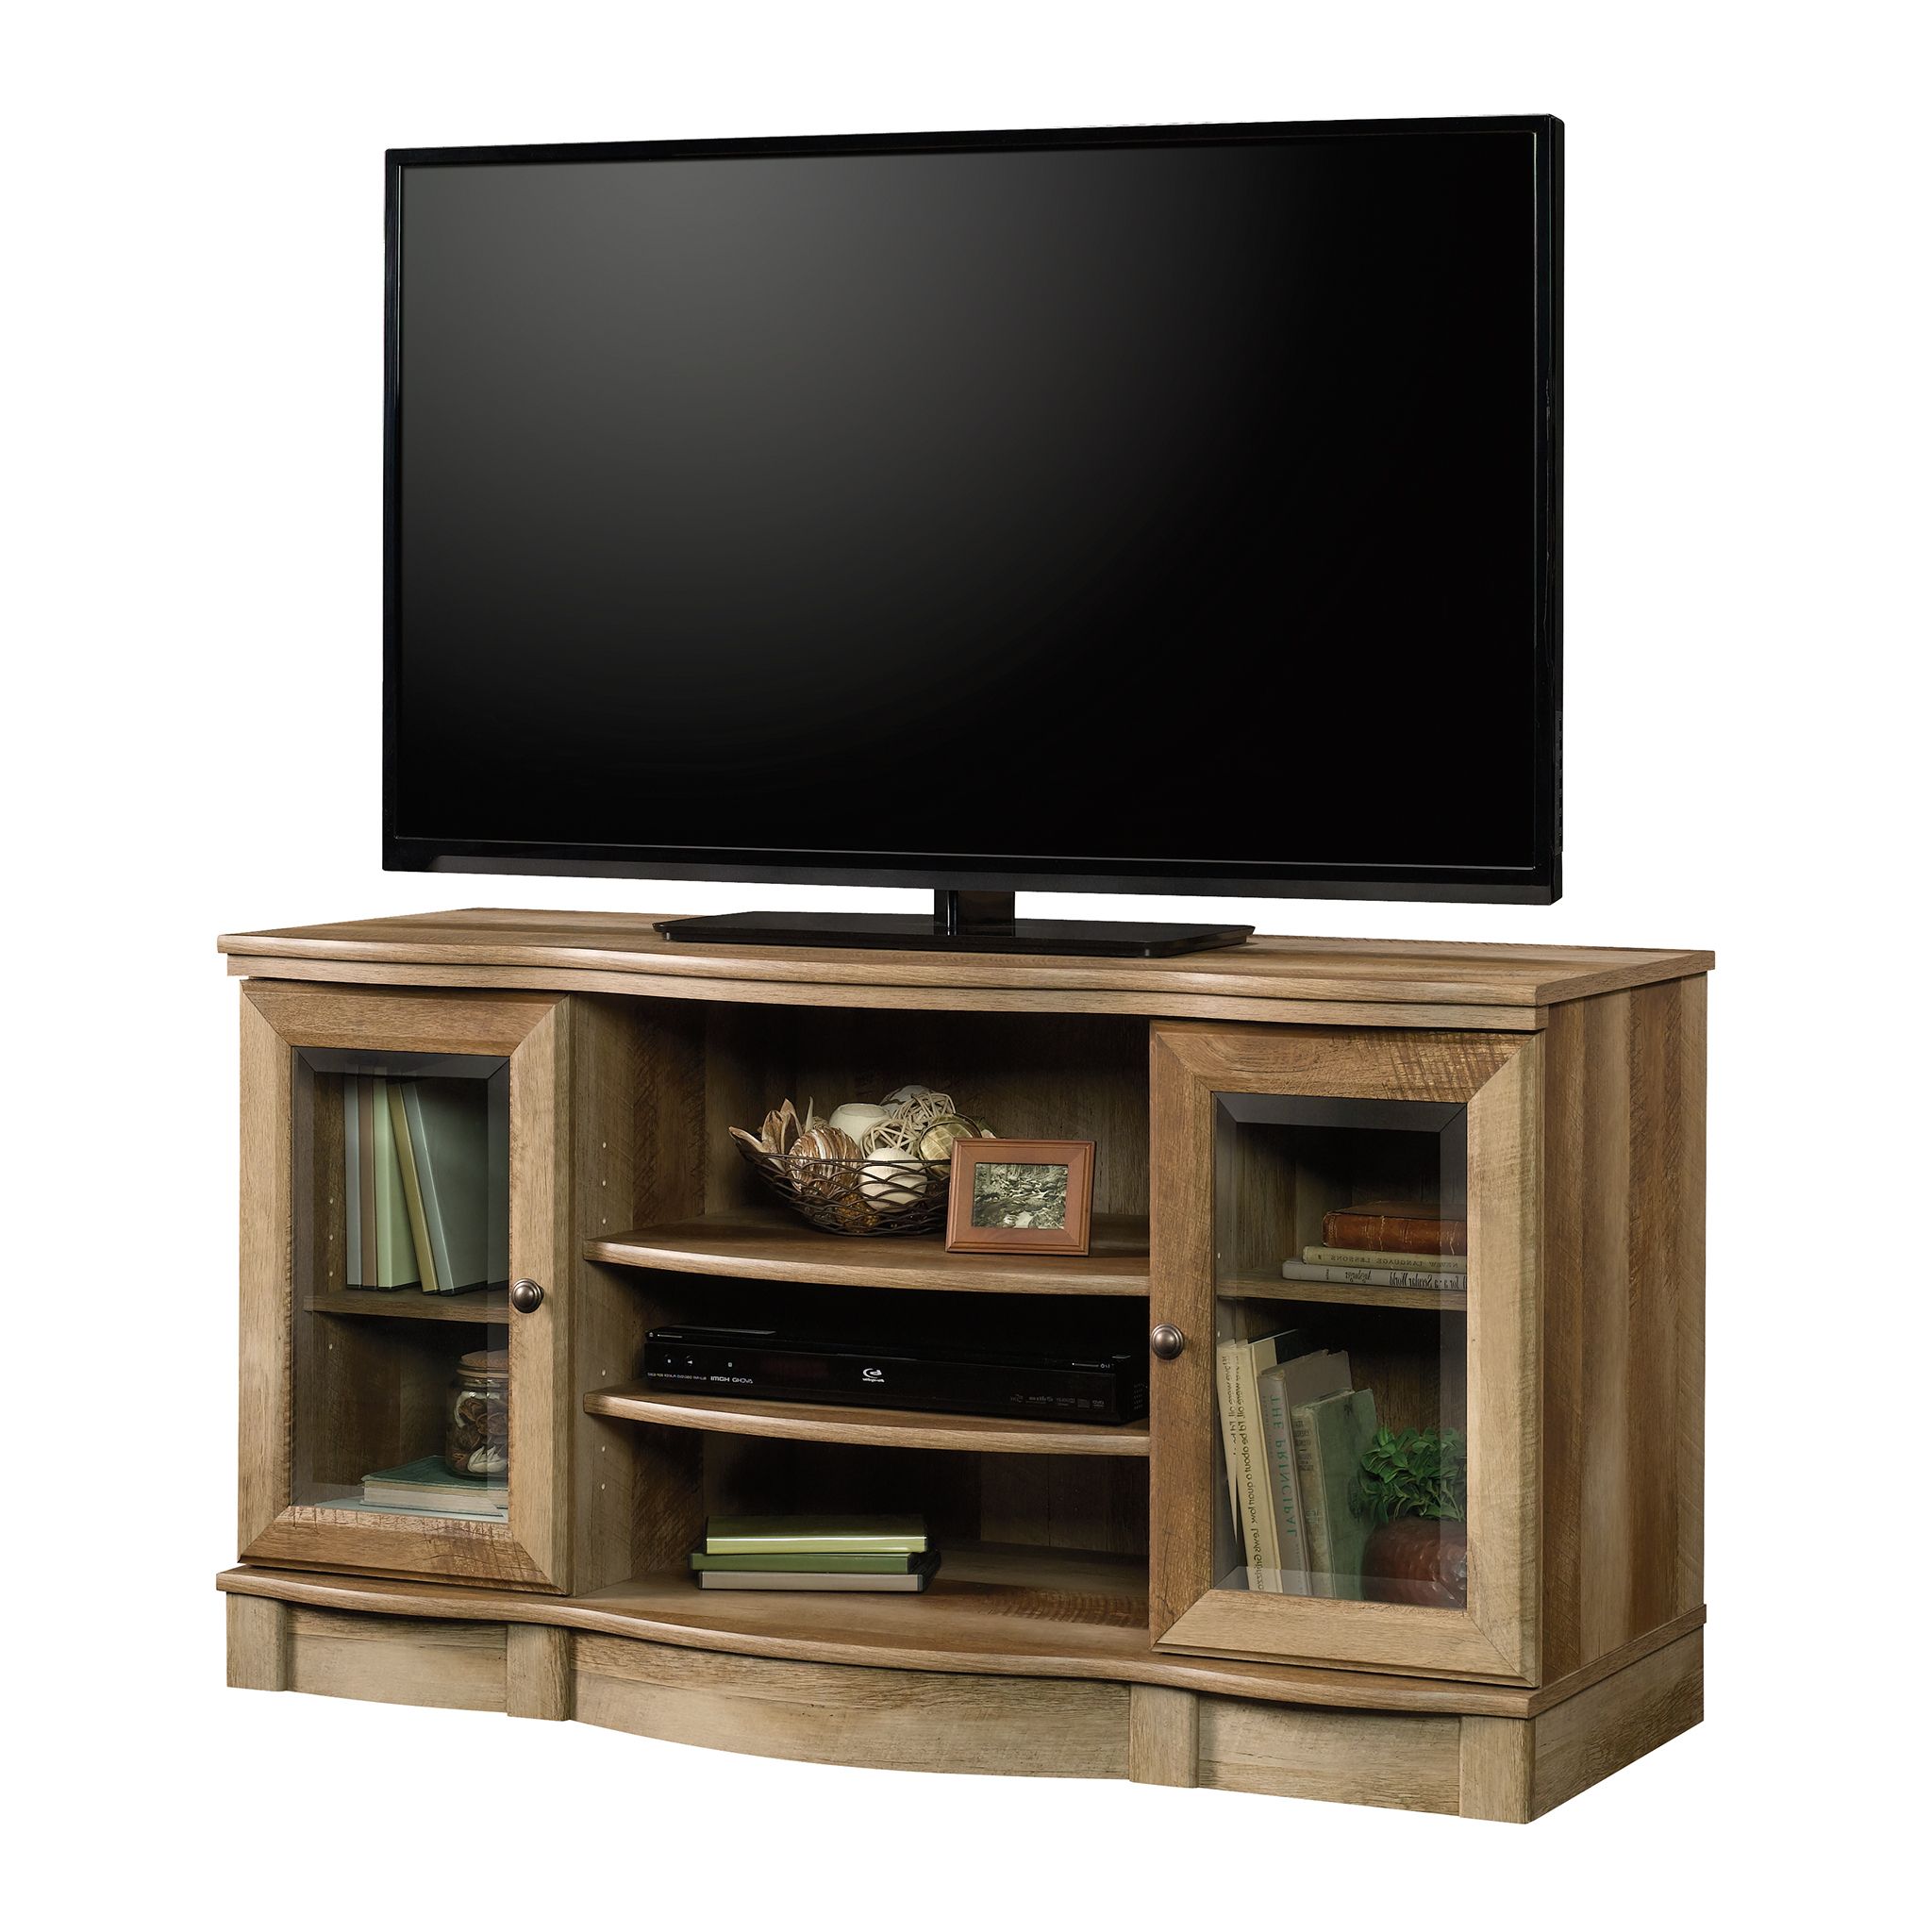 Sauder Regent Place Tv Stand For Tvs Up To 50", Craftsman Intended For Mclelland Tv Stands For Tvs Up To 50" (View 2 of 20)